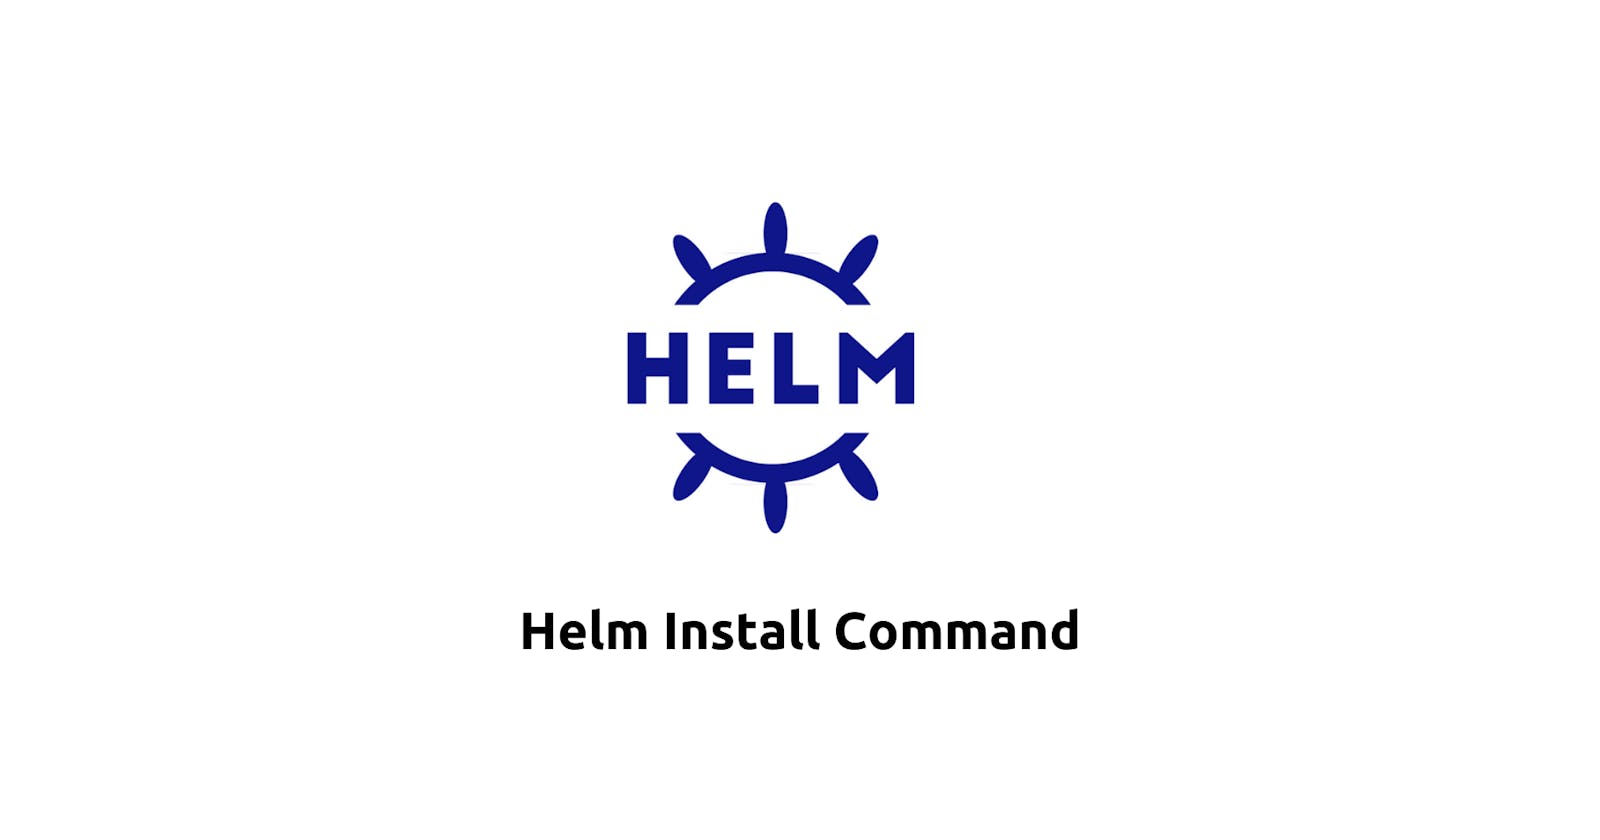 Deploying Applications with Helm: Using the Helm Install Command